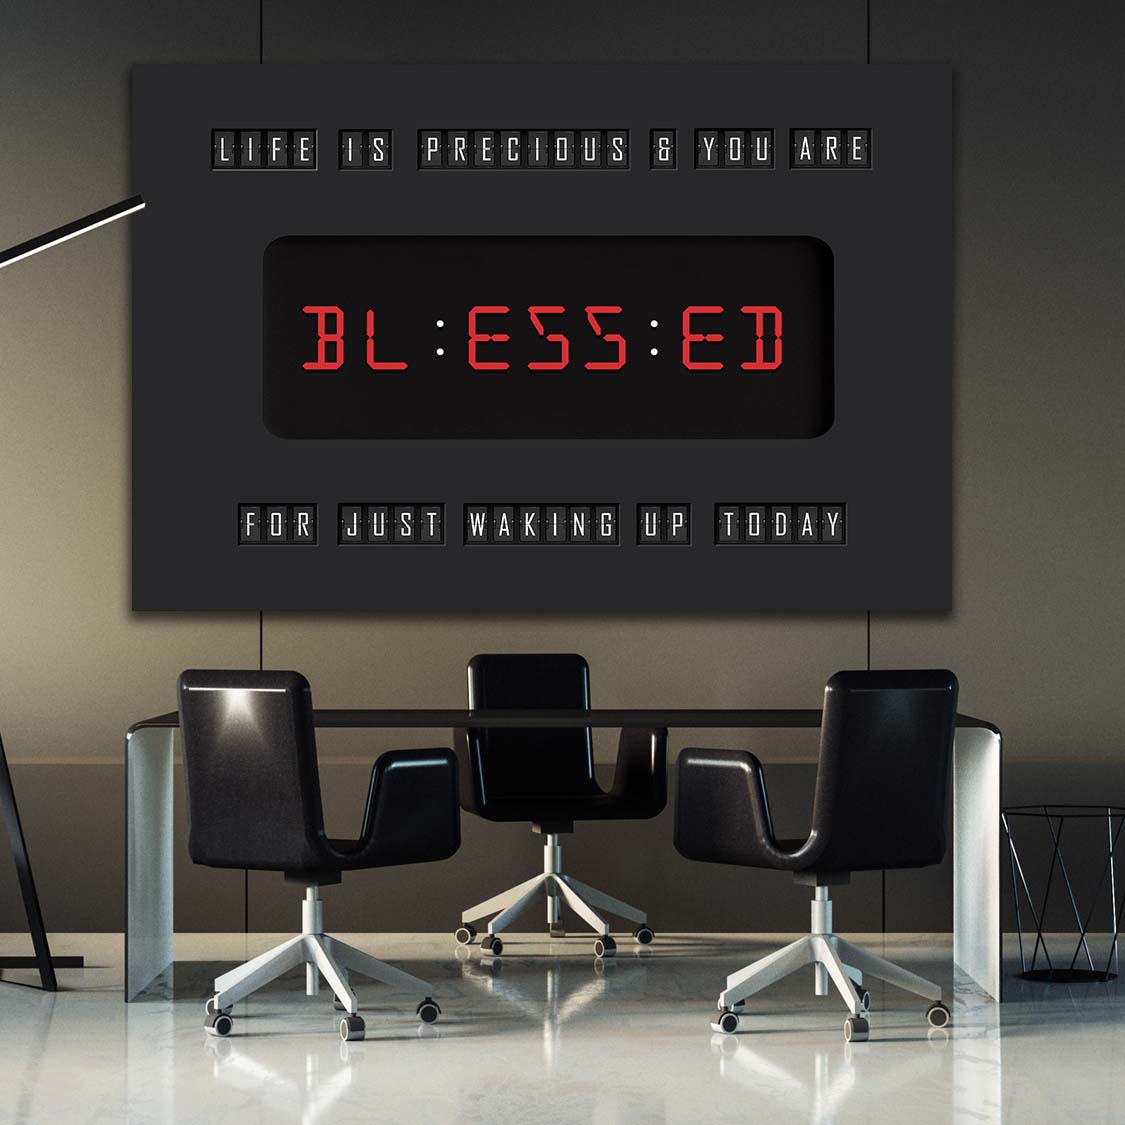 Blessed for Waking Up Today Clock Wall Art | Inspirational Wall Art Motivational Wall Art Quotes Office Art | ImpaktMaker Exclusive Canvas Art Landscape